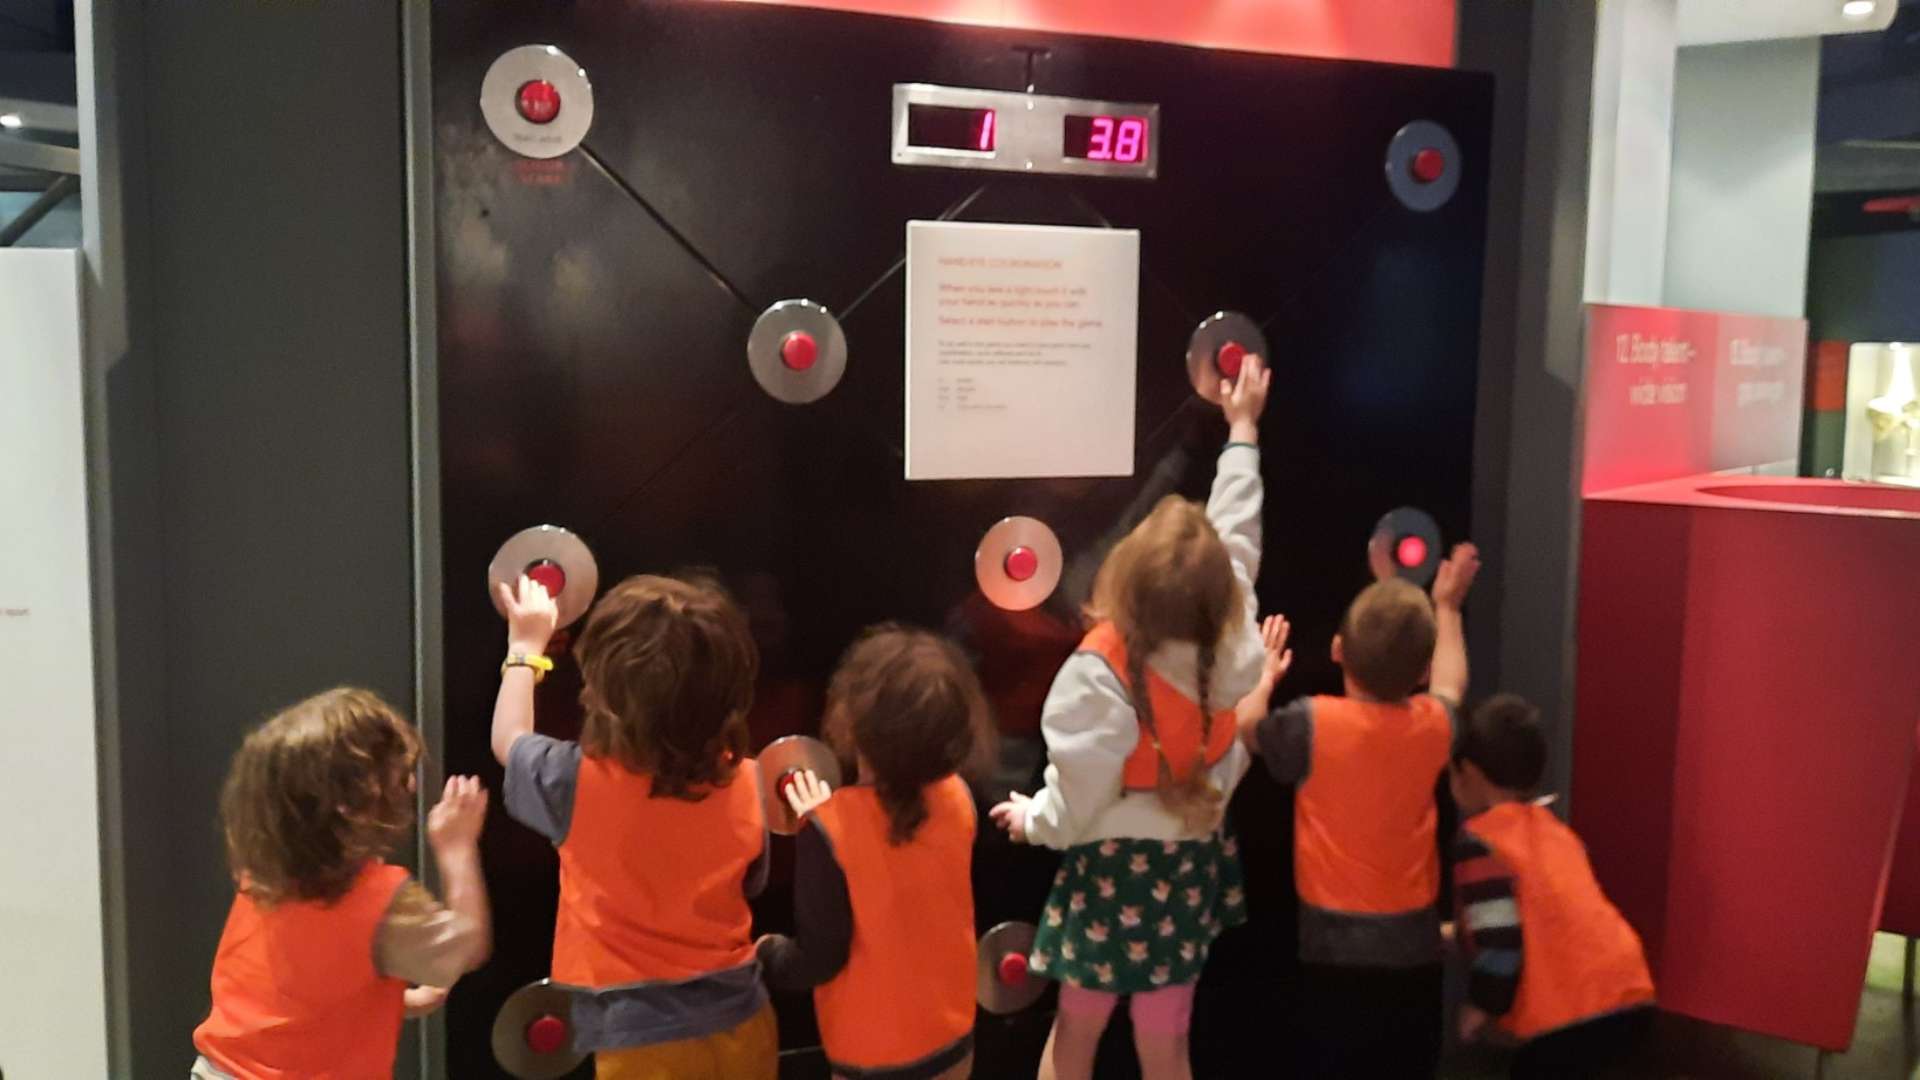 ELC students have their back to the camera. They are reaching up and touching an interactive Science exhibit with levers.